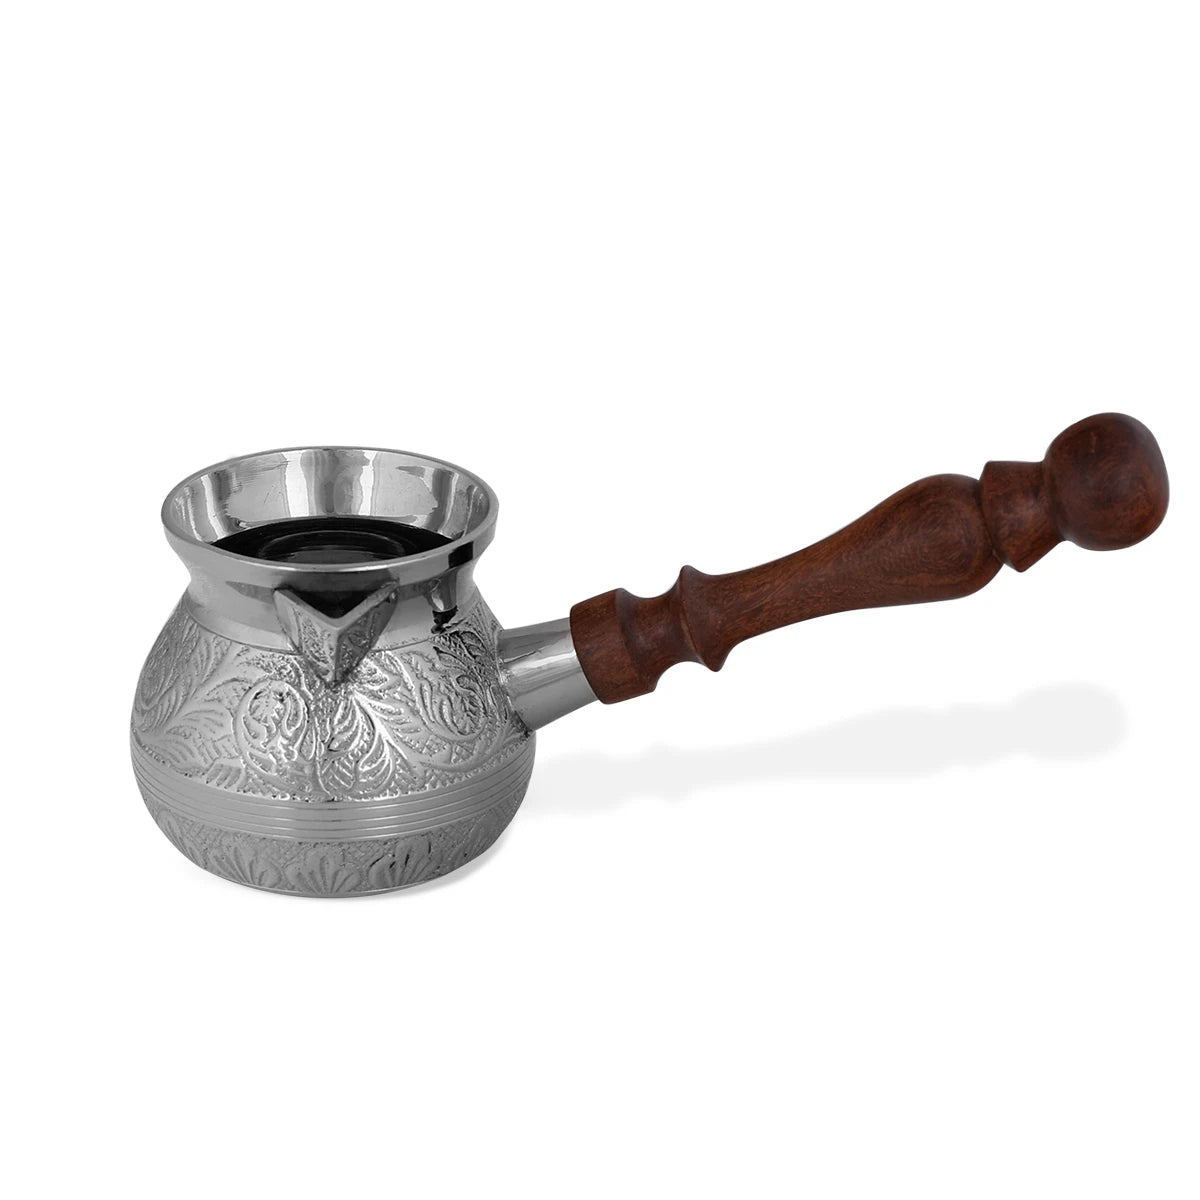 Authentic Turkish Coffee Brewing Pot Traditionally Handmade in Brass With Floristic Motifs